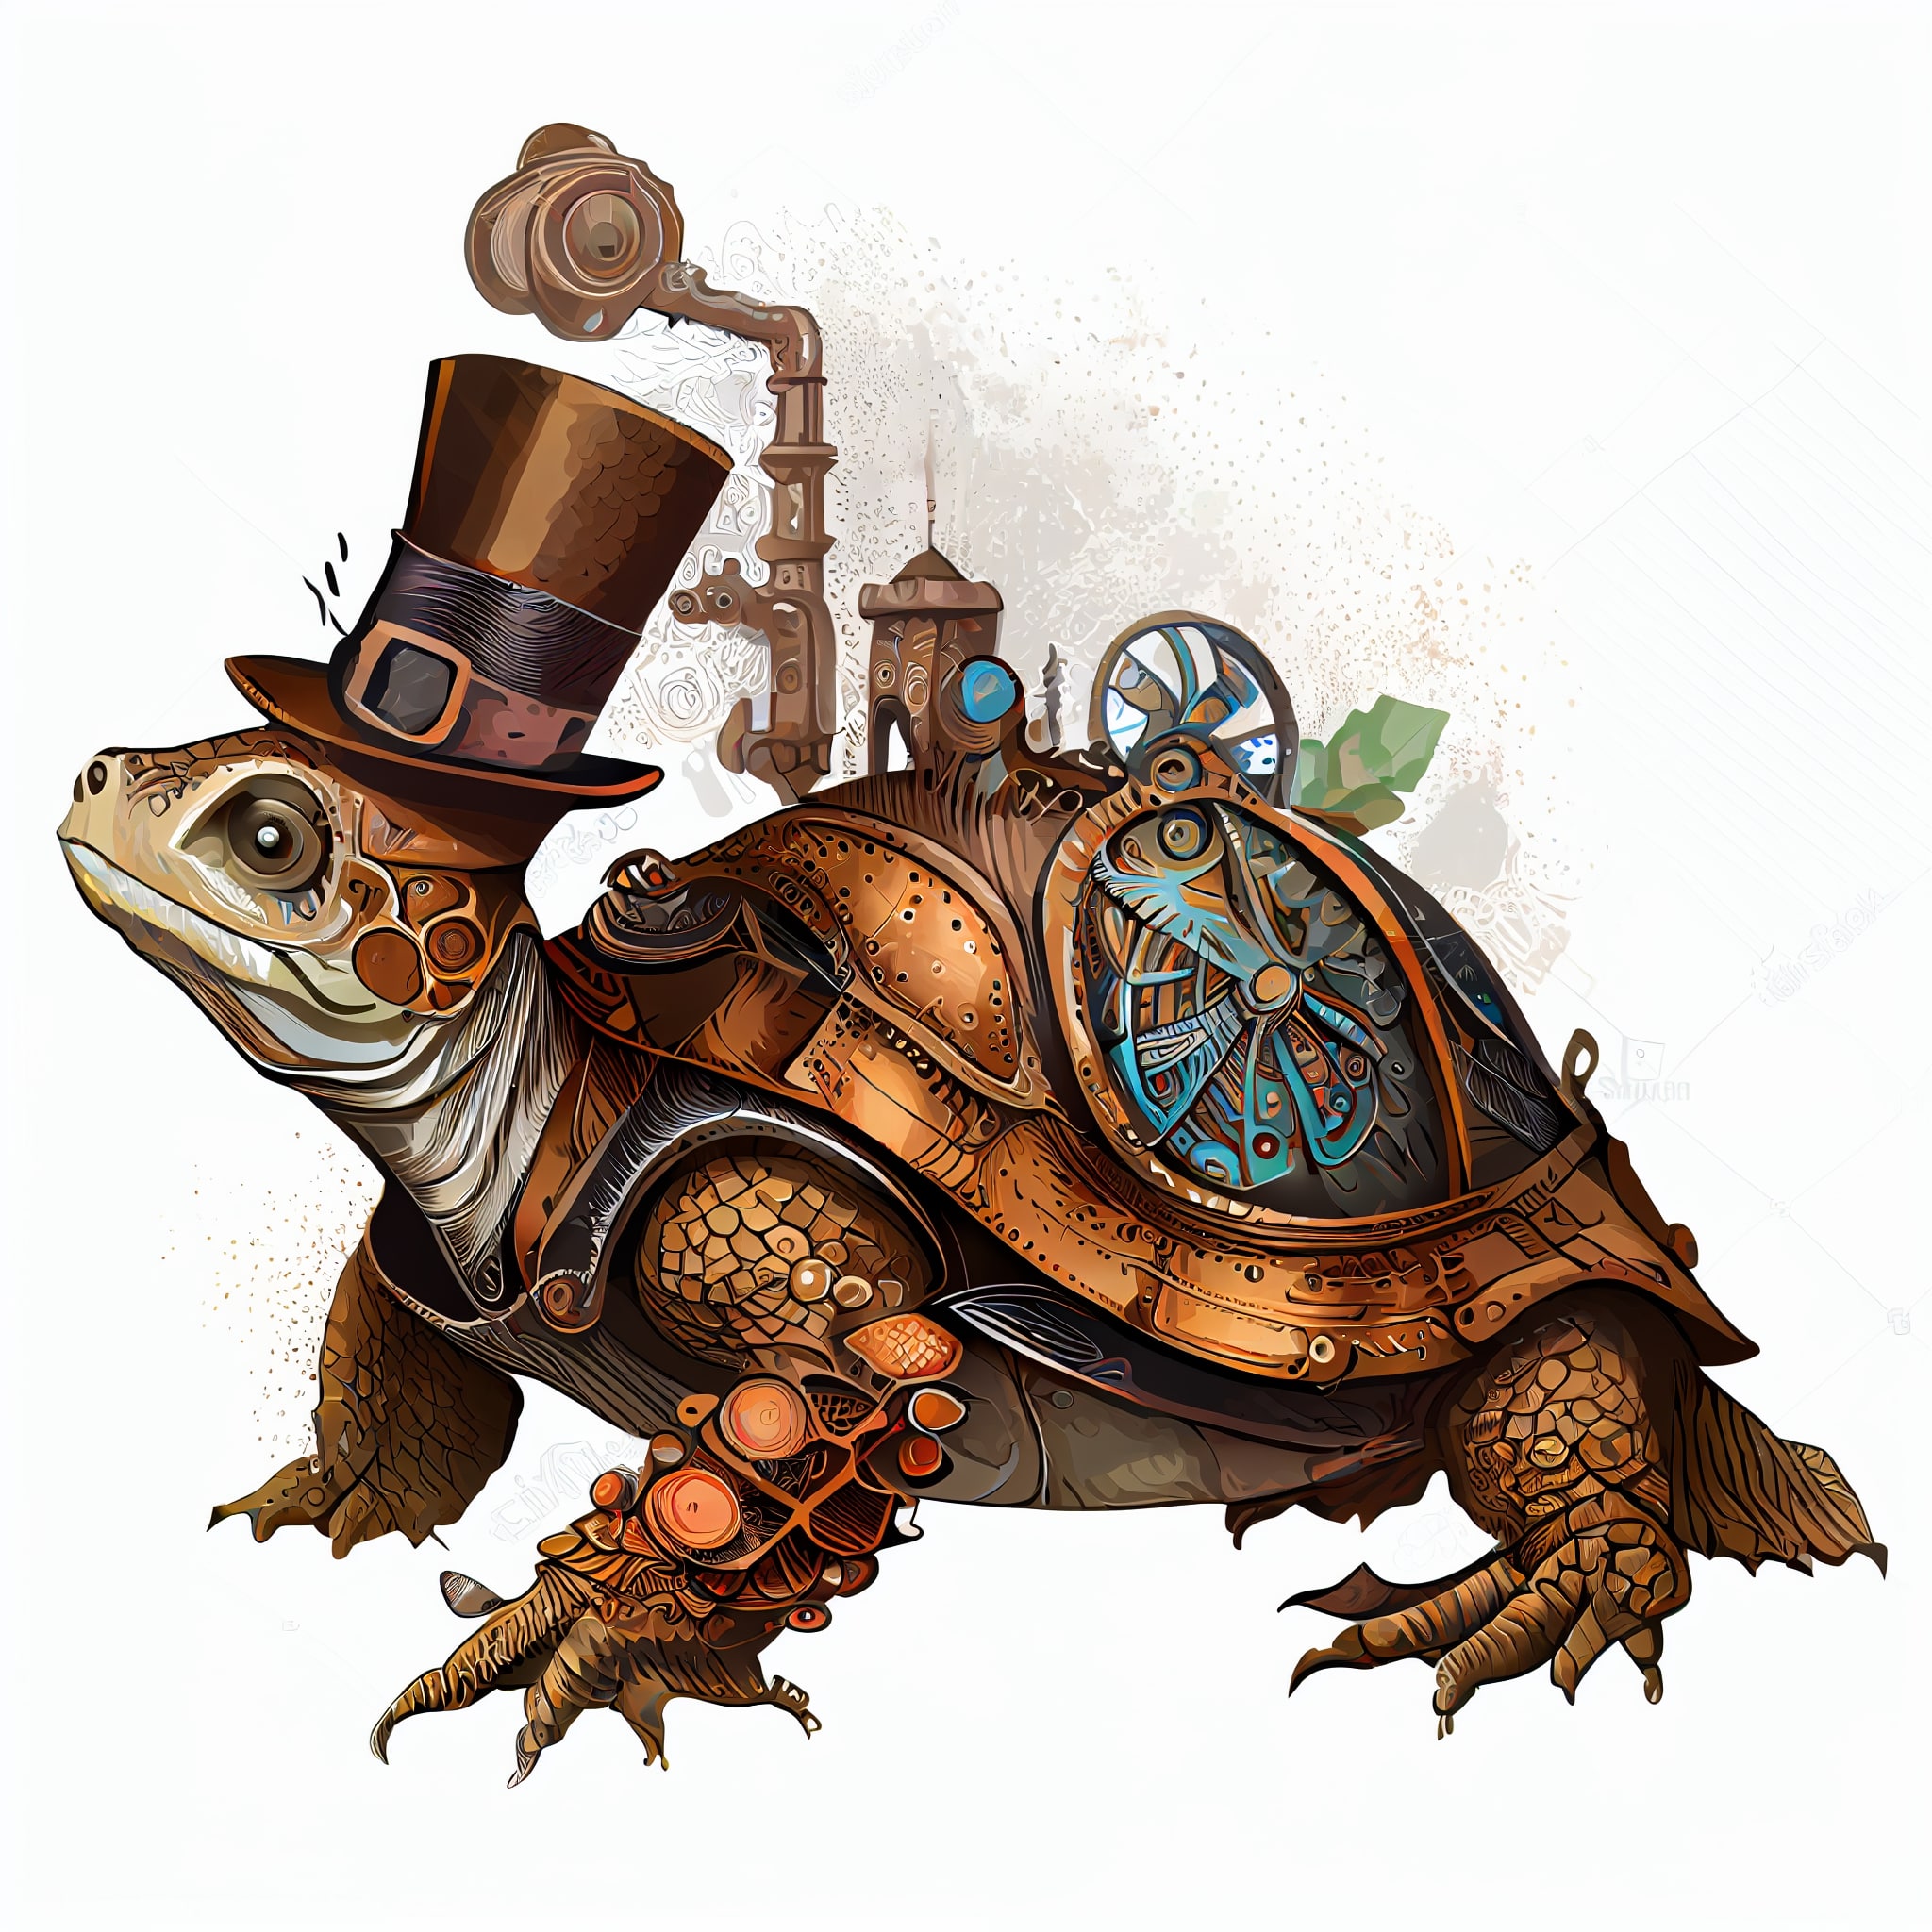 Turtle wearing a top hat and a top hat.